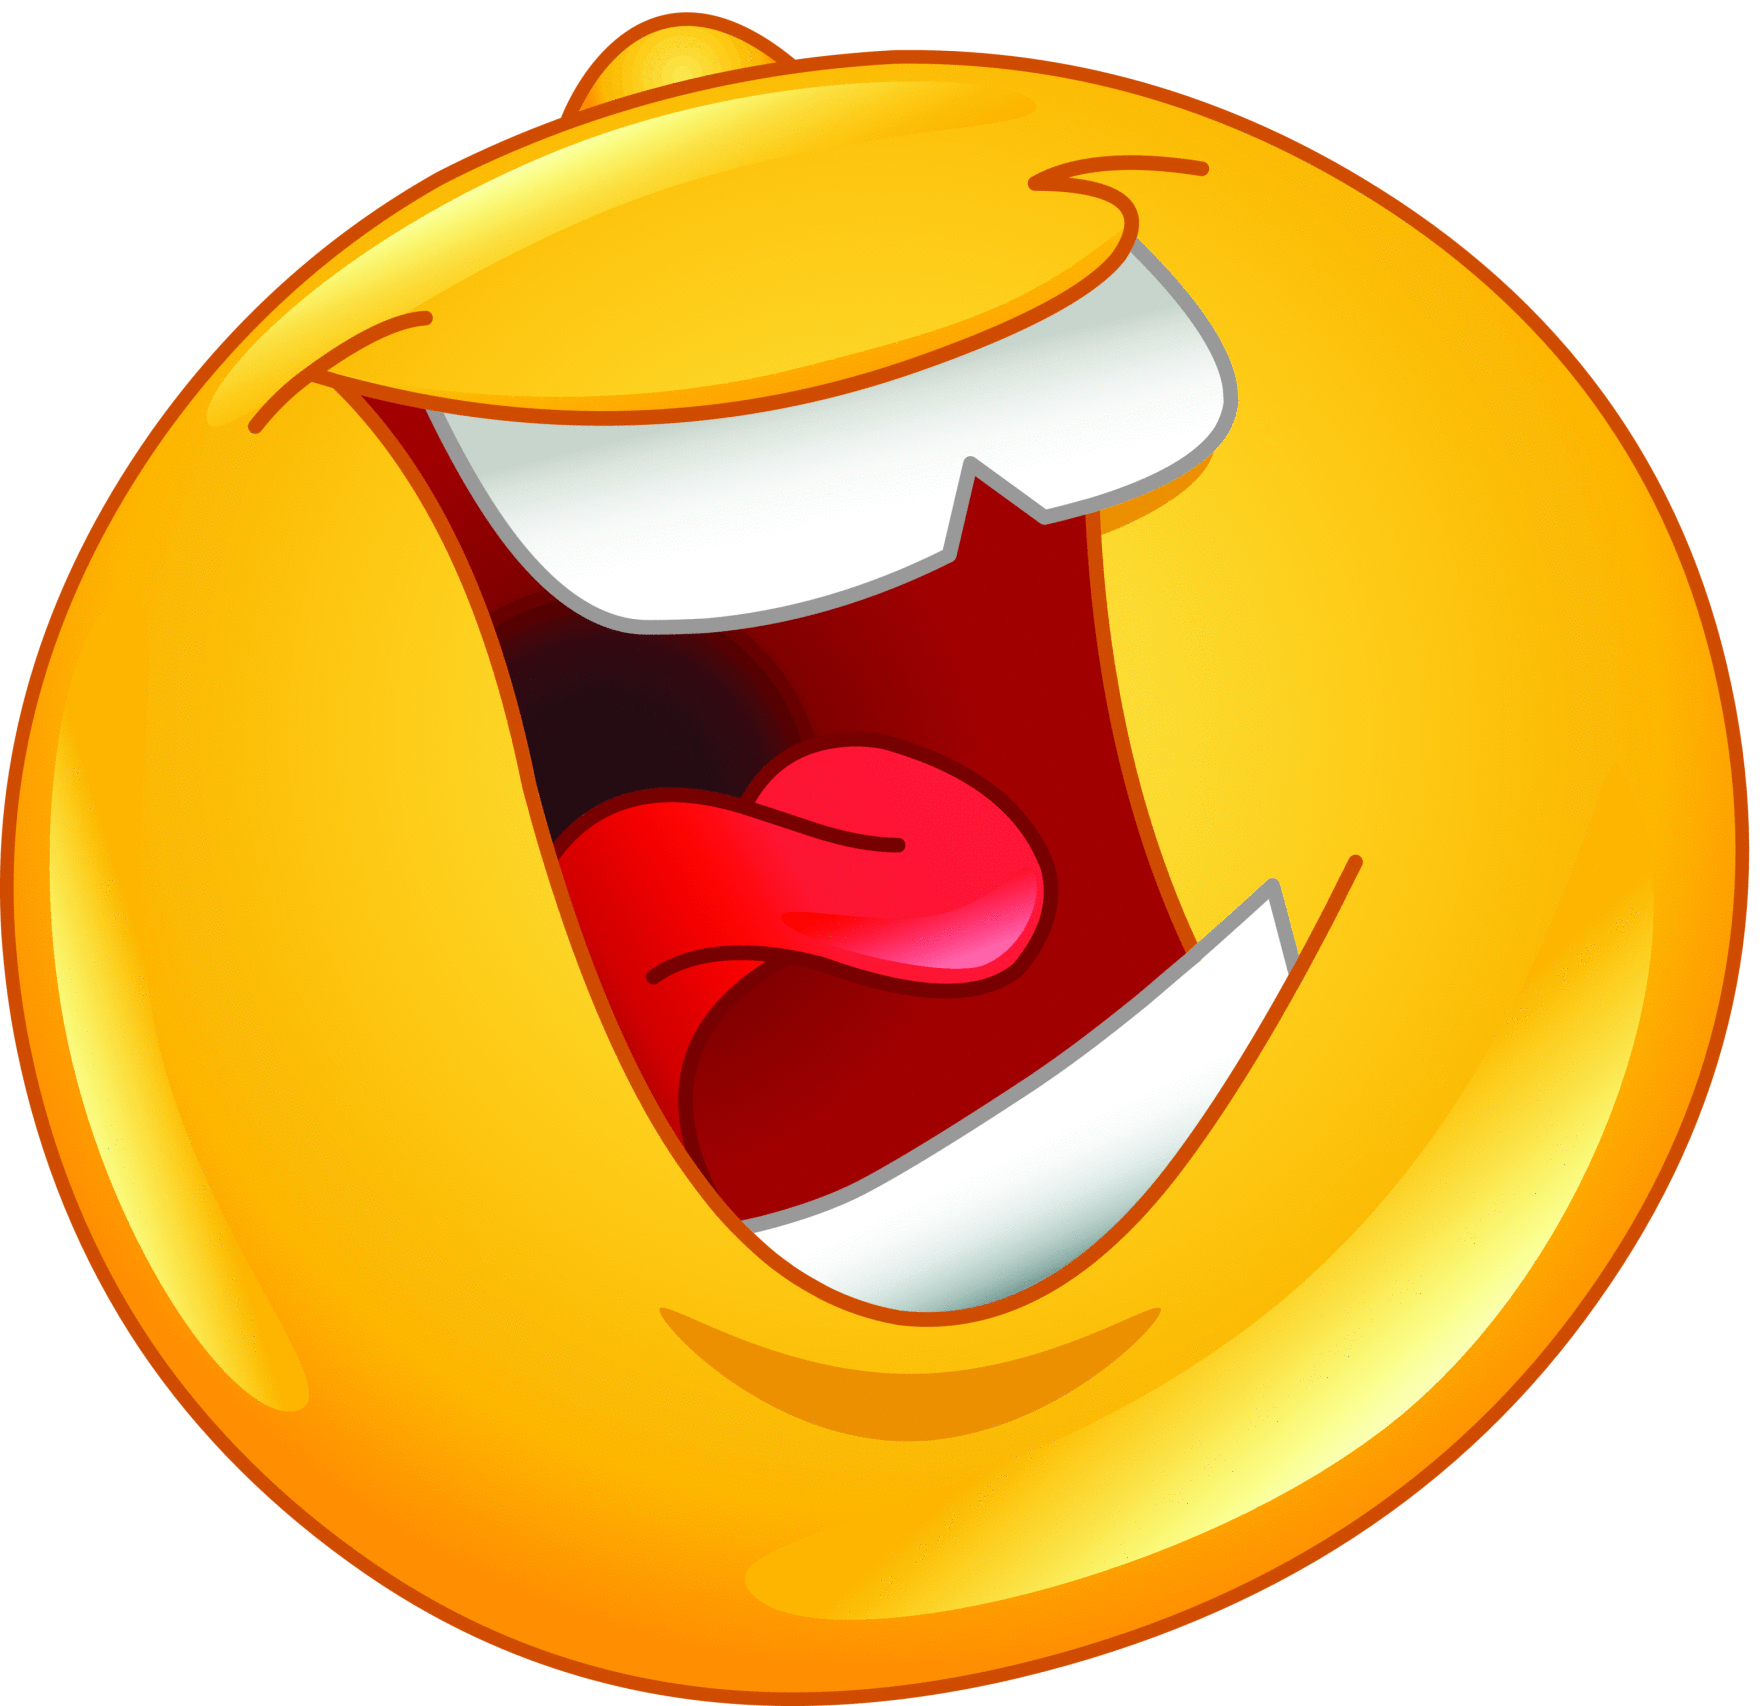 Hysterical Laughter Clipart